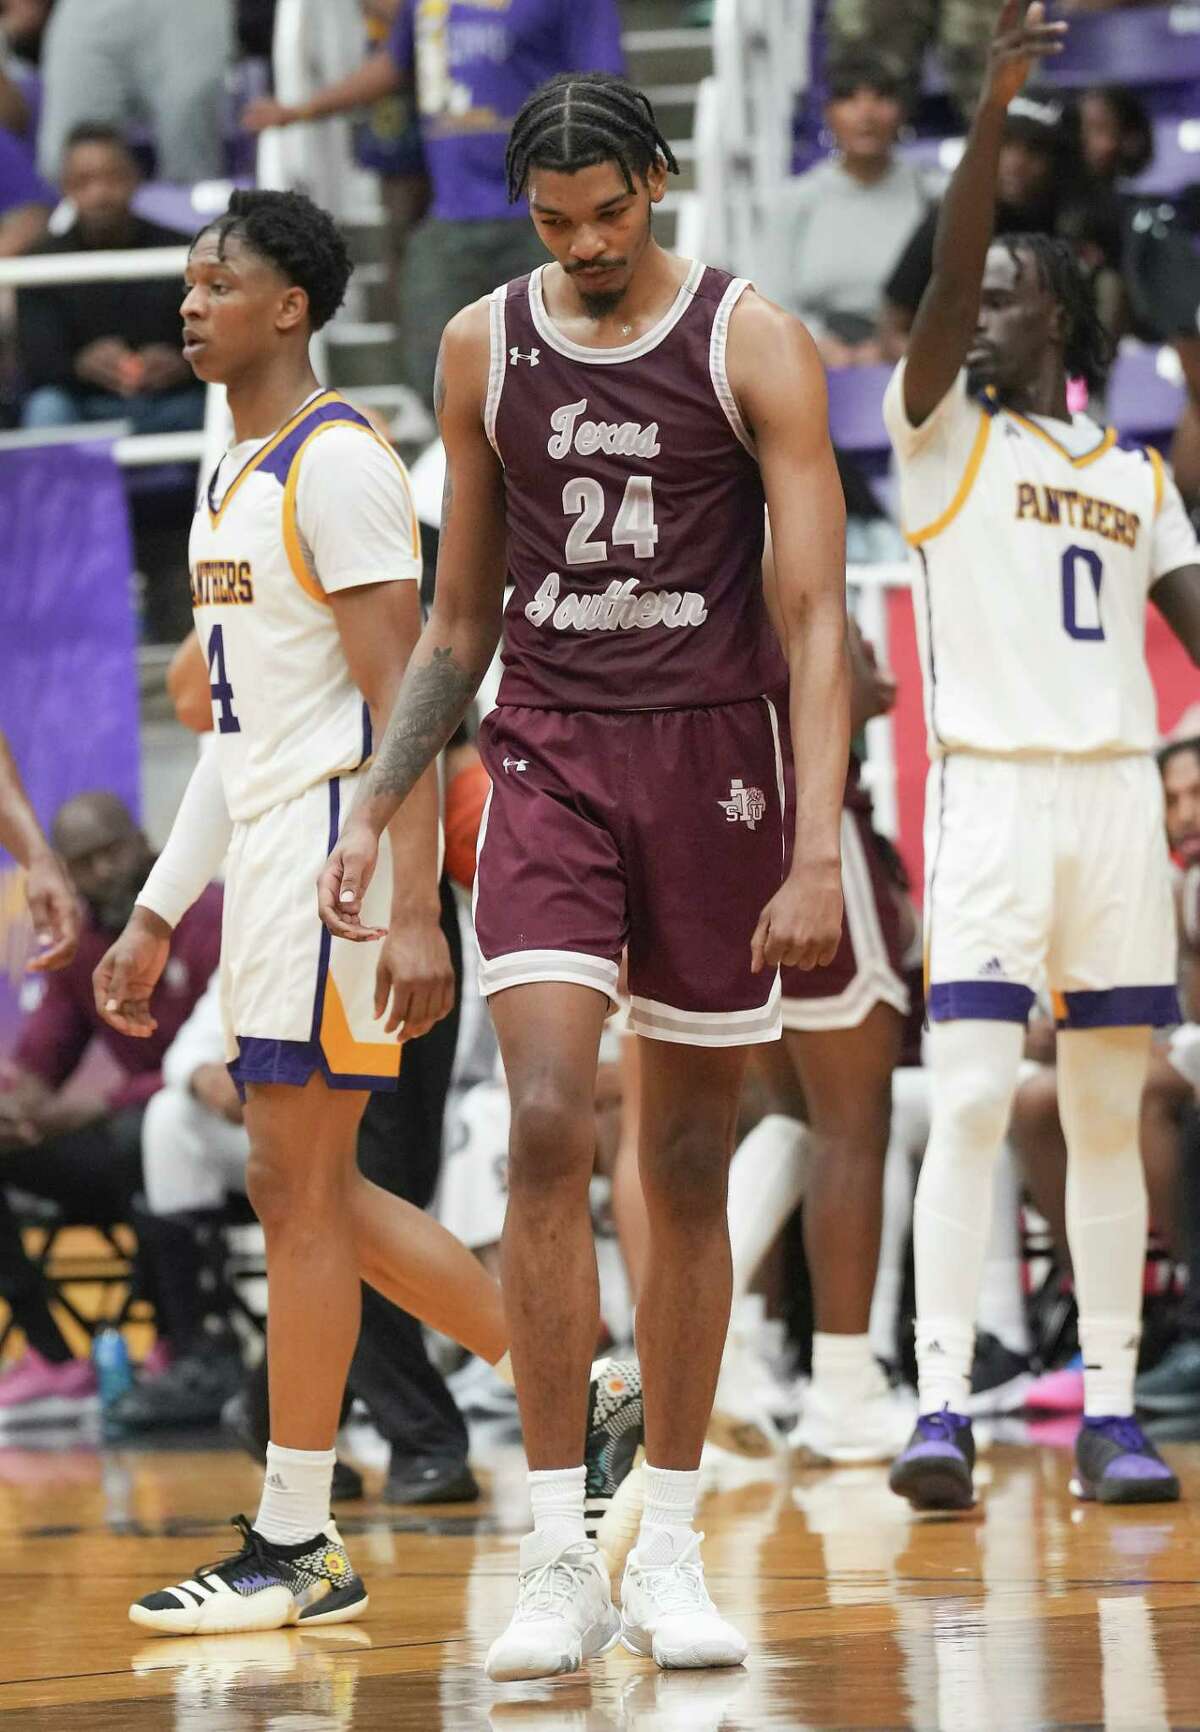 Texas Southern forward John Walker III (24) walks back up court after a turnover in the final seconds of game action against Prairie View A&M on Saturday, March 4, 2023. Prairie View A&M beat Texas Southern 78-74.